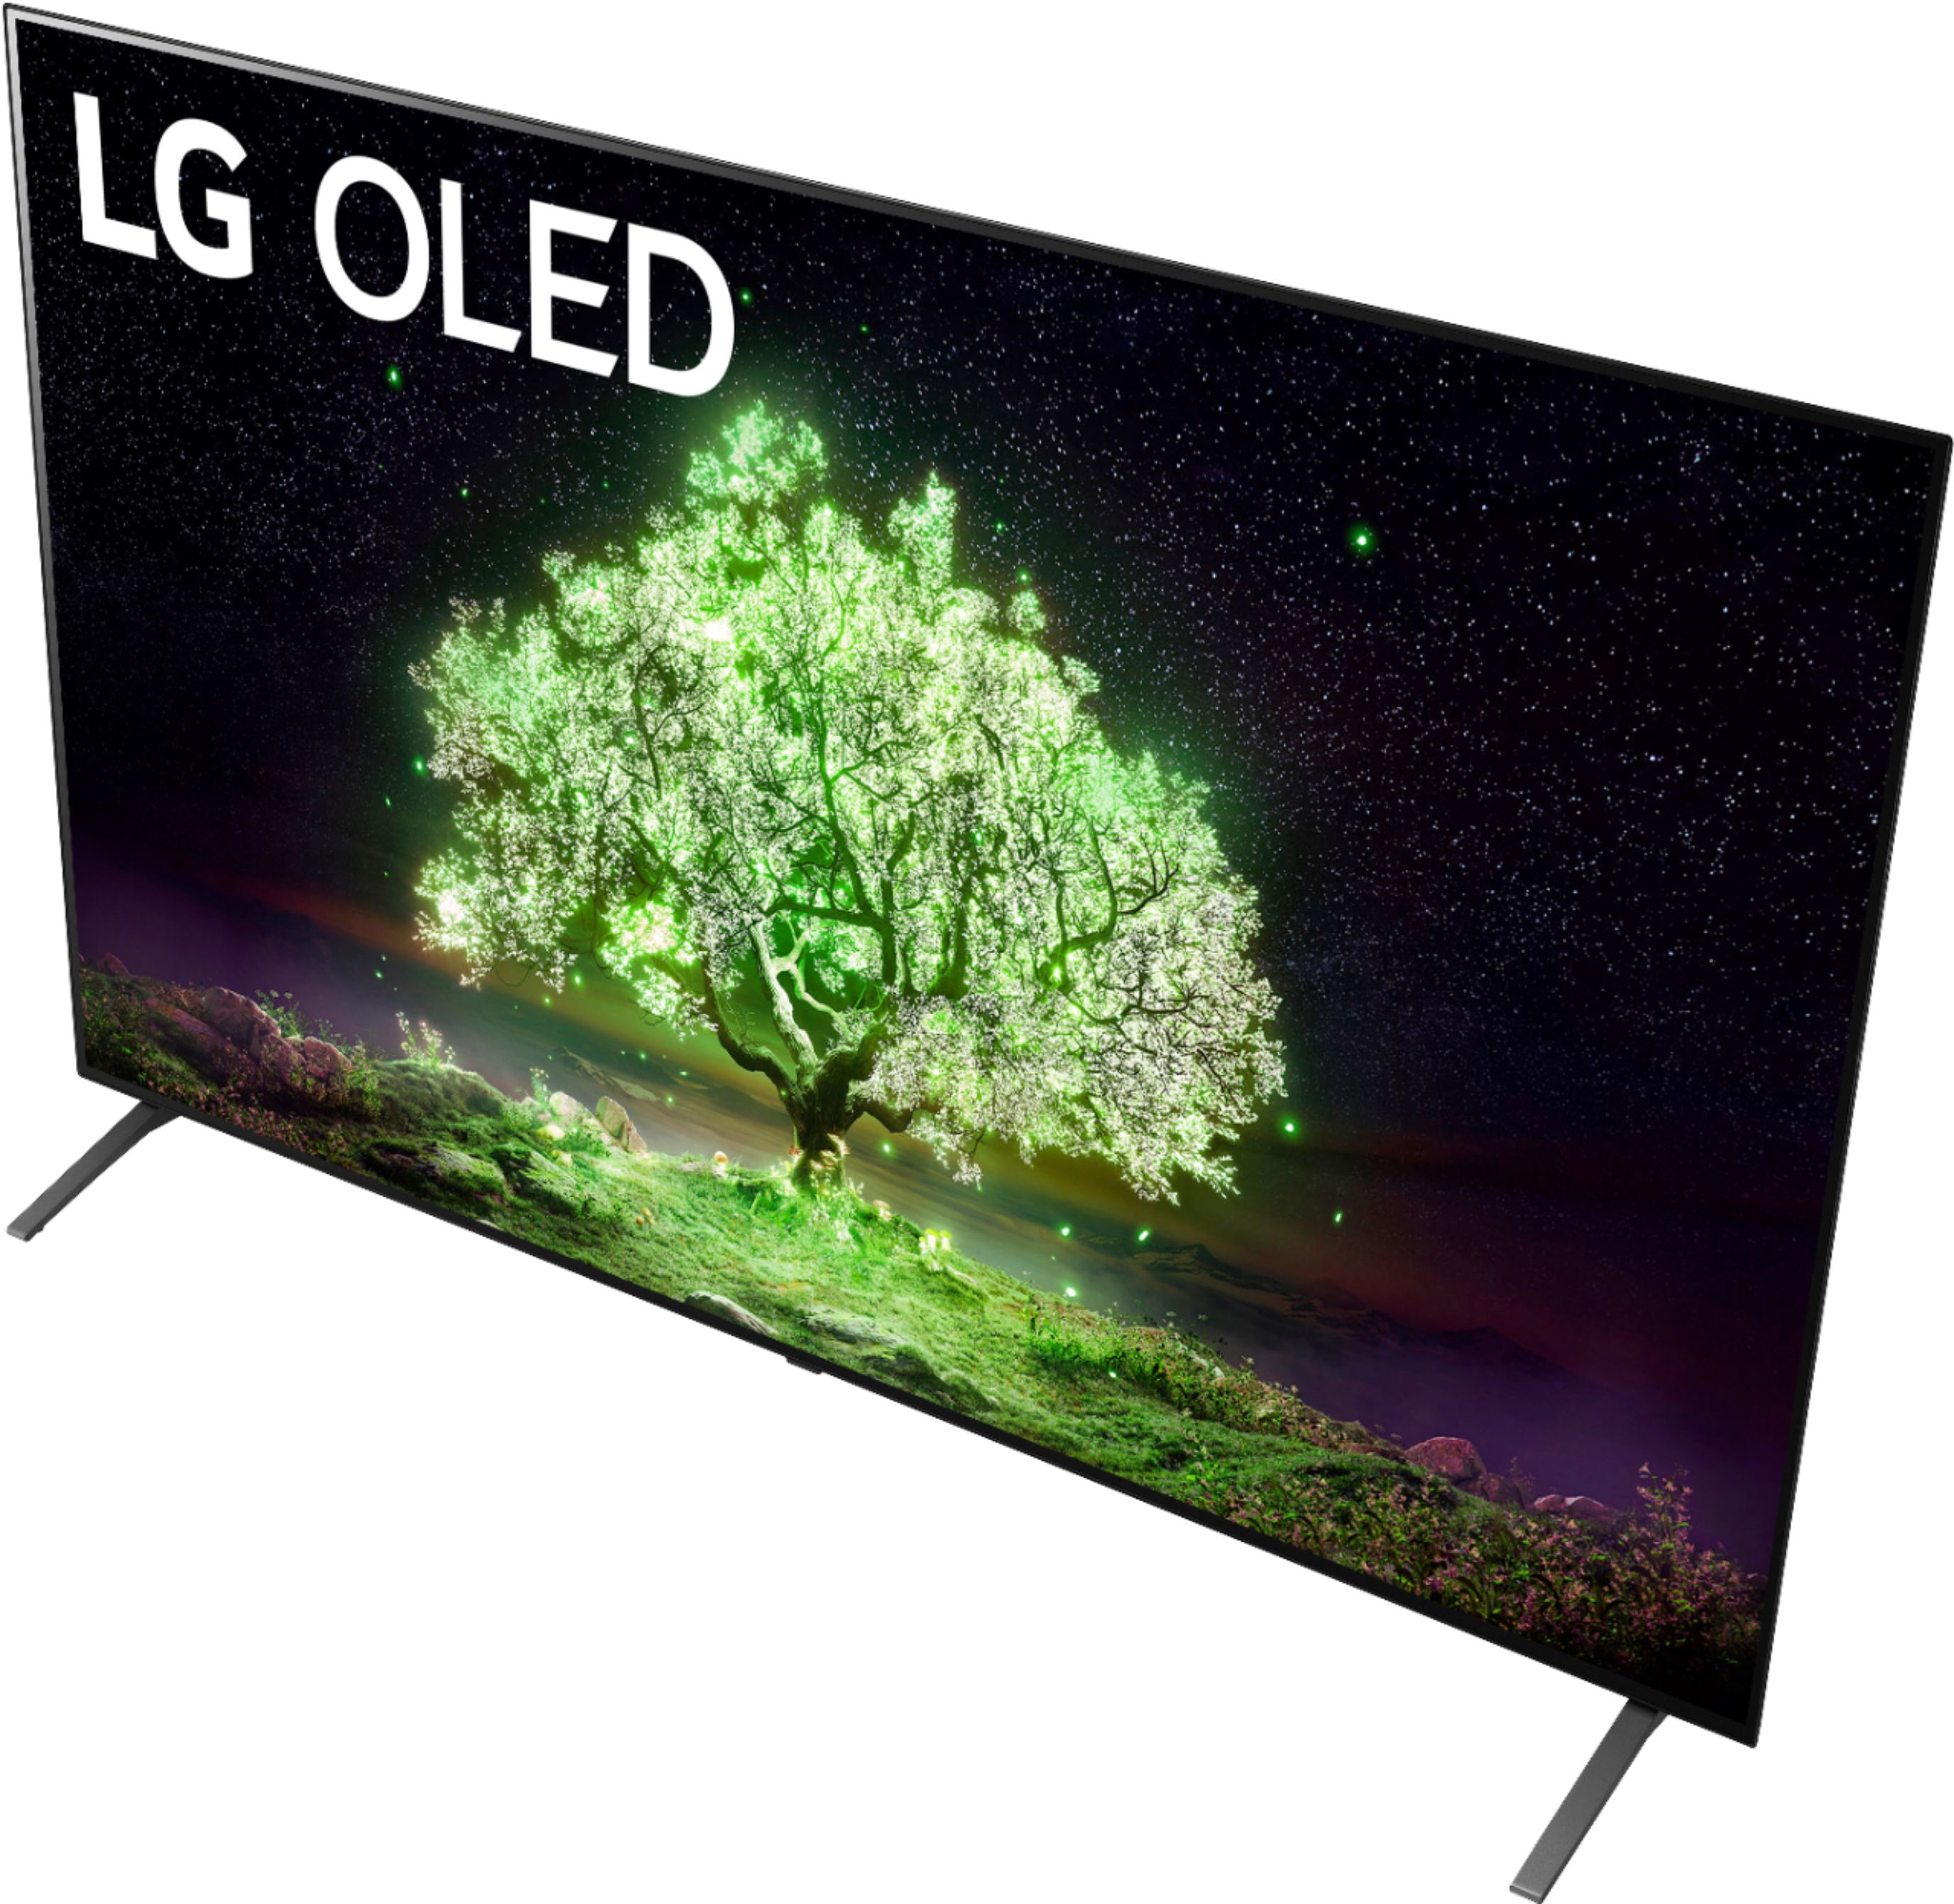 LG OLED A1 Series 77” Alexa Built-in 4k Smart TV, 60Hz Refresh Rate,  AI-Powered 4K, Dolby Vision IQ and Dolby Atmos, WiSA Ready, Gaming Mode